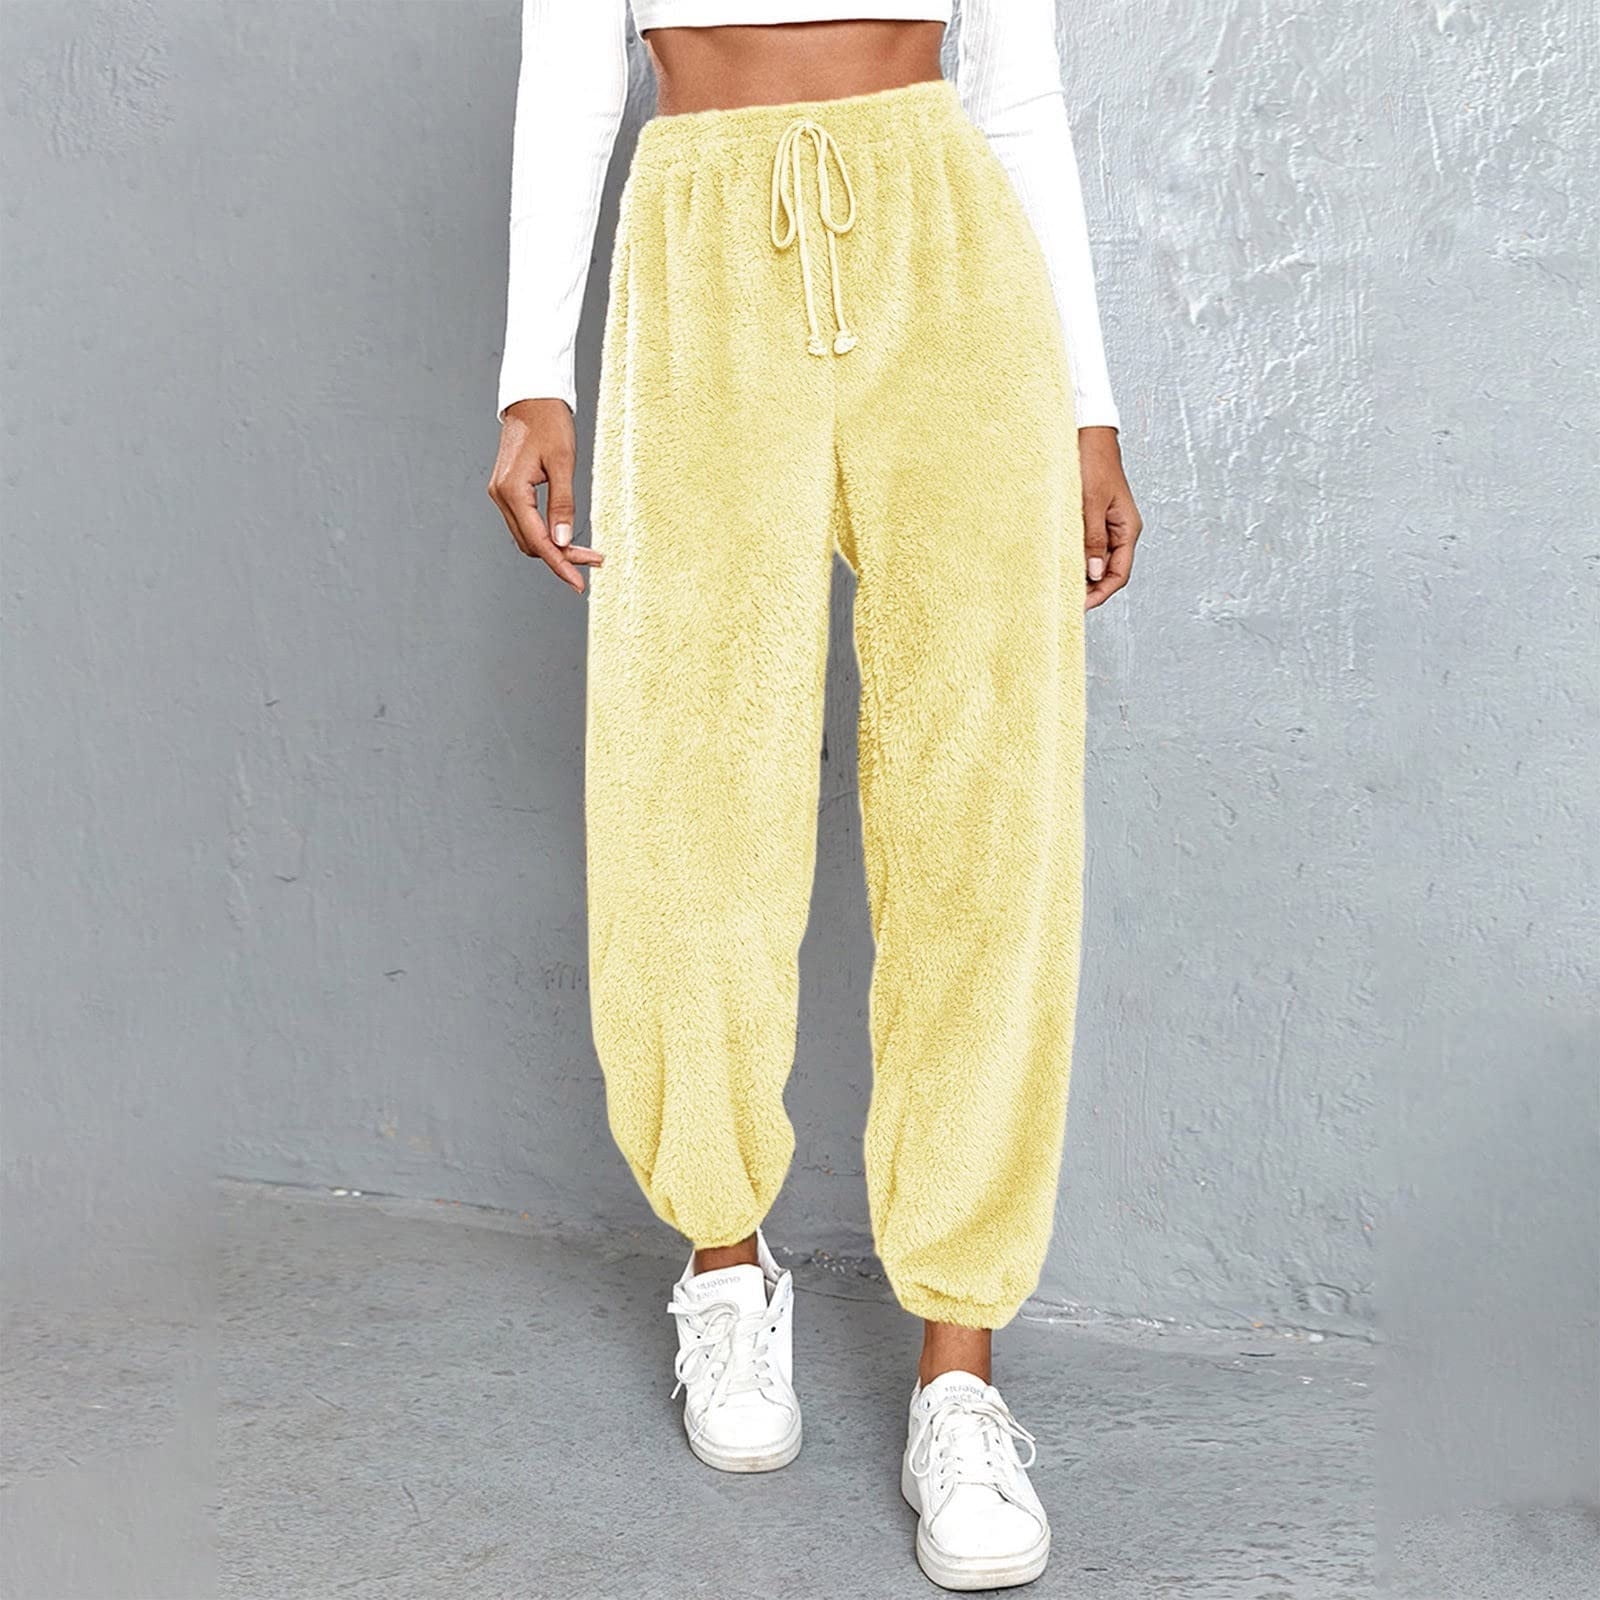 Winter Thicken Womens Harem Pants With Drawstring And Twisted Knit